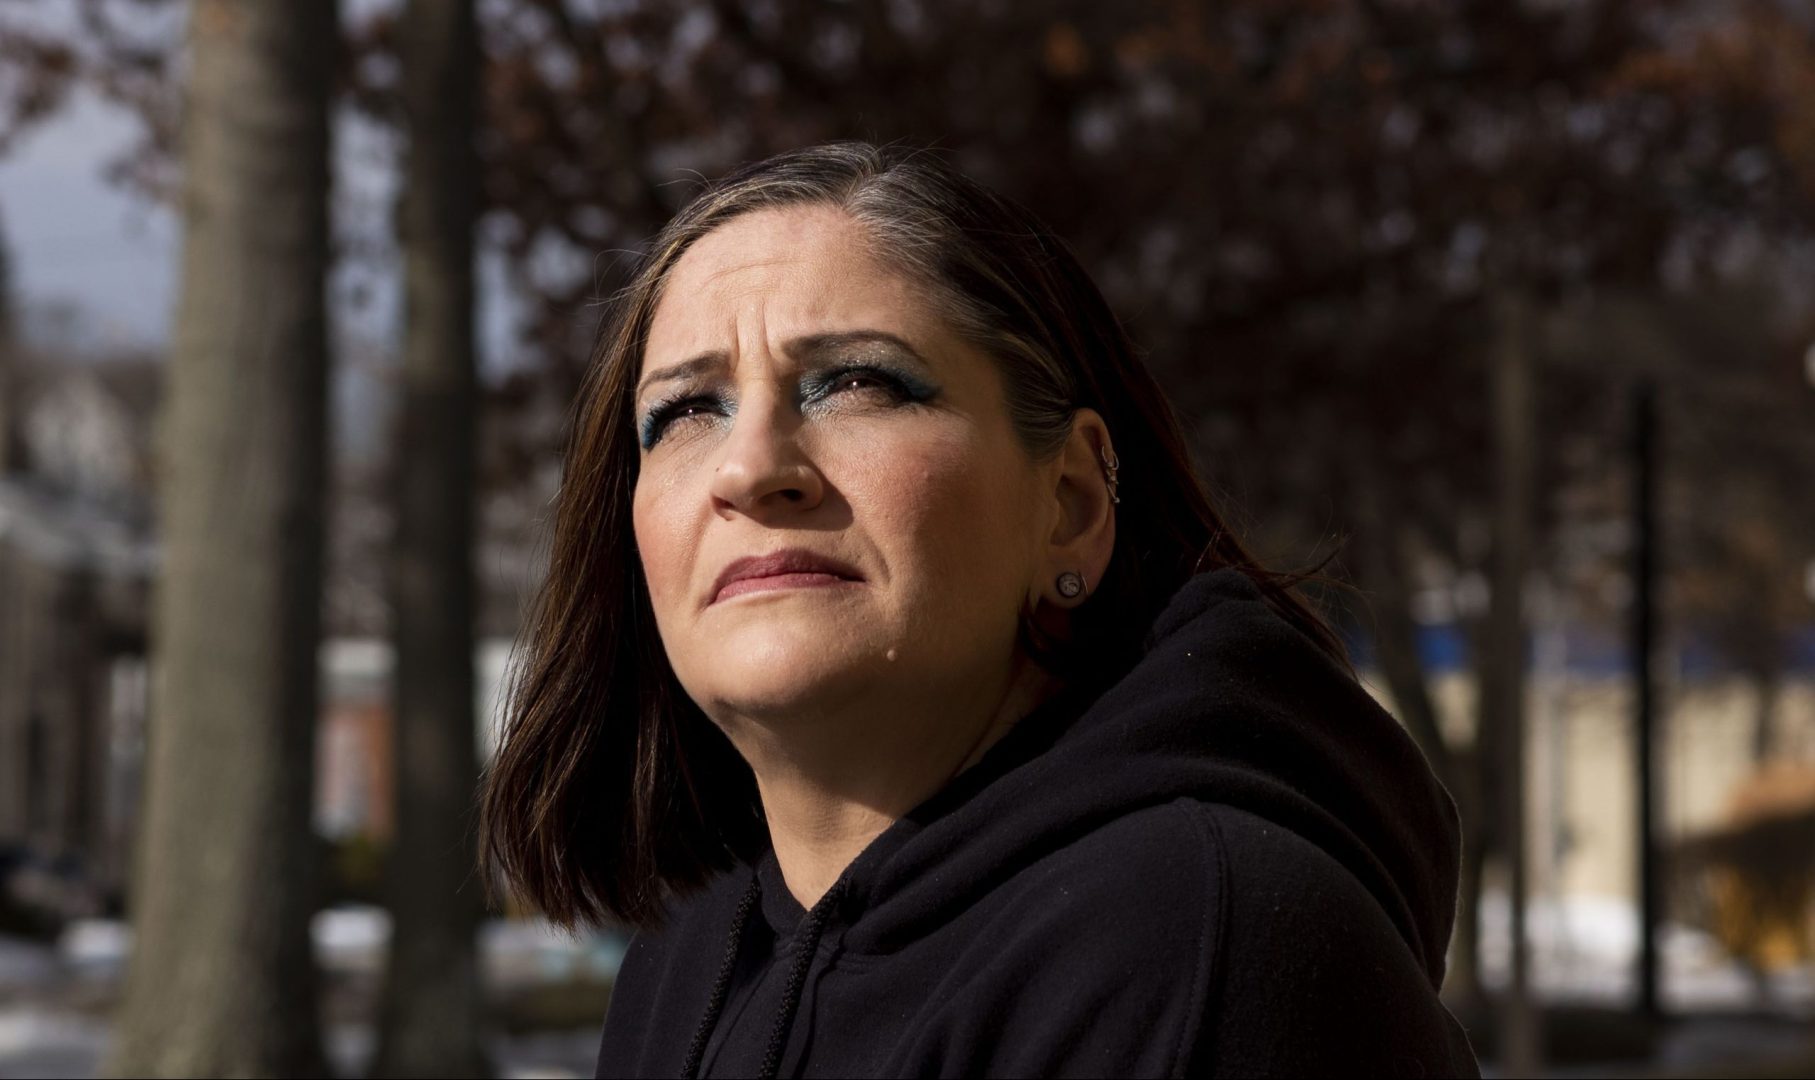 Sonya Mosey was alarmed to learn she would have to stop taking her physician-prescribed medication for opioid use disorder when the state transferred her supervision to Jefferson County in 2018.